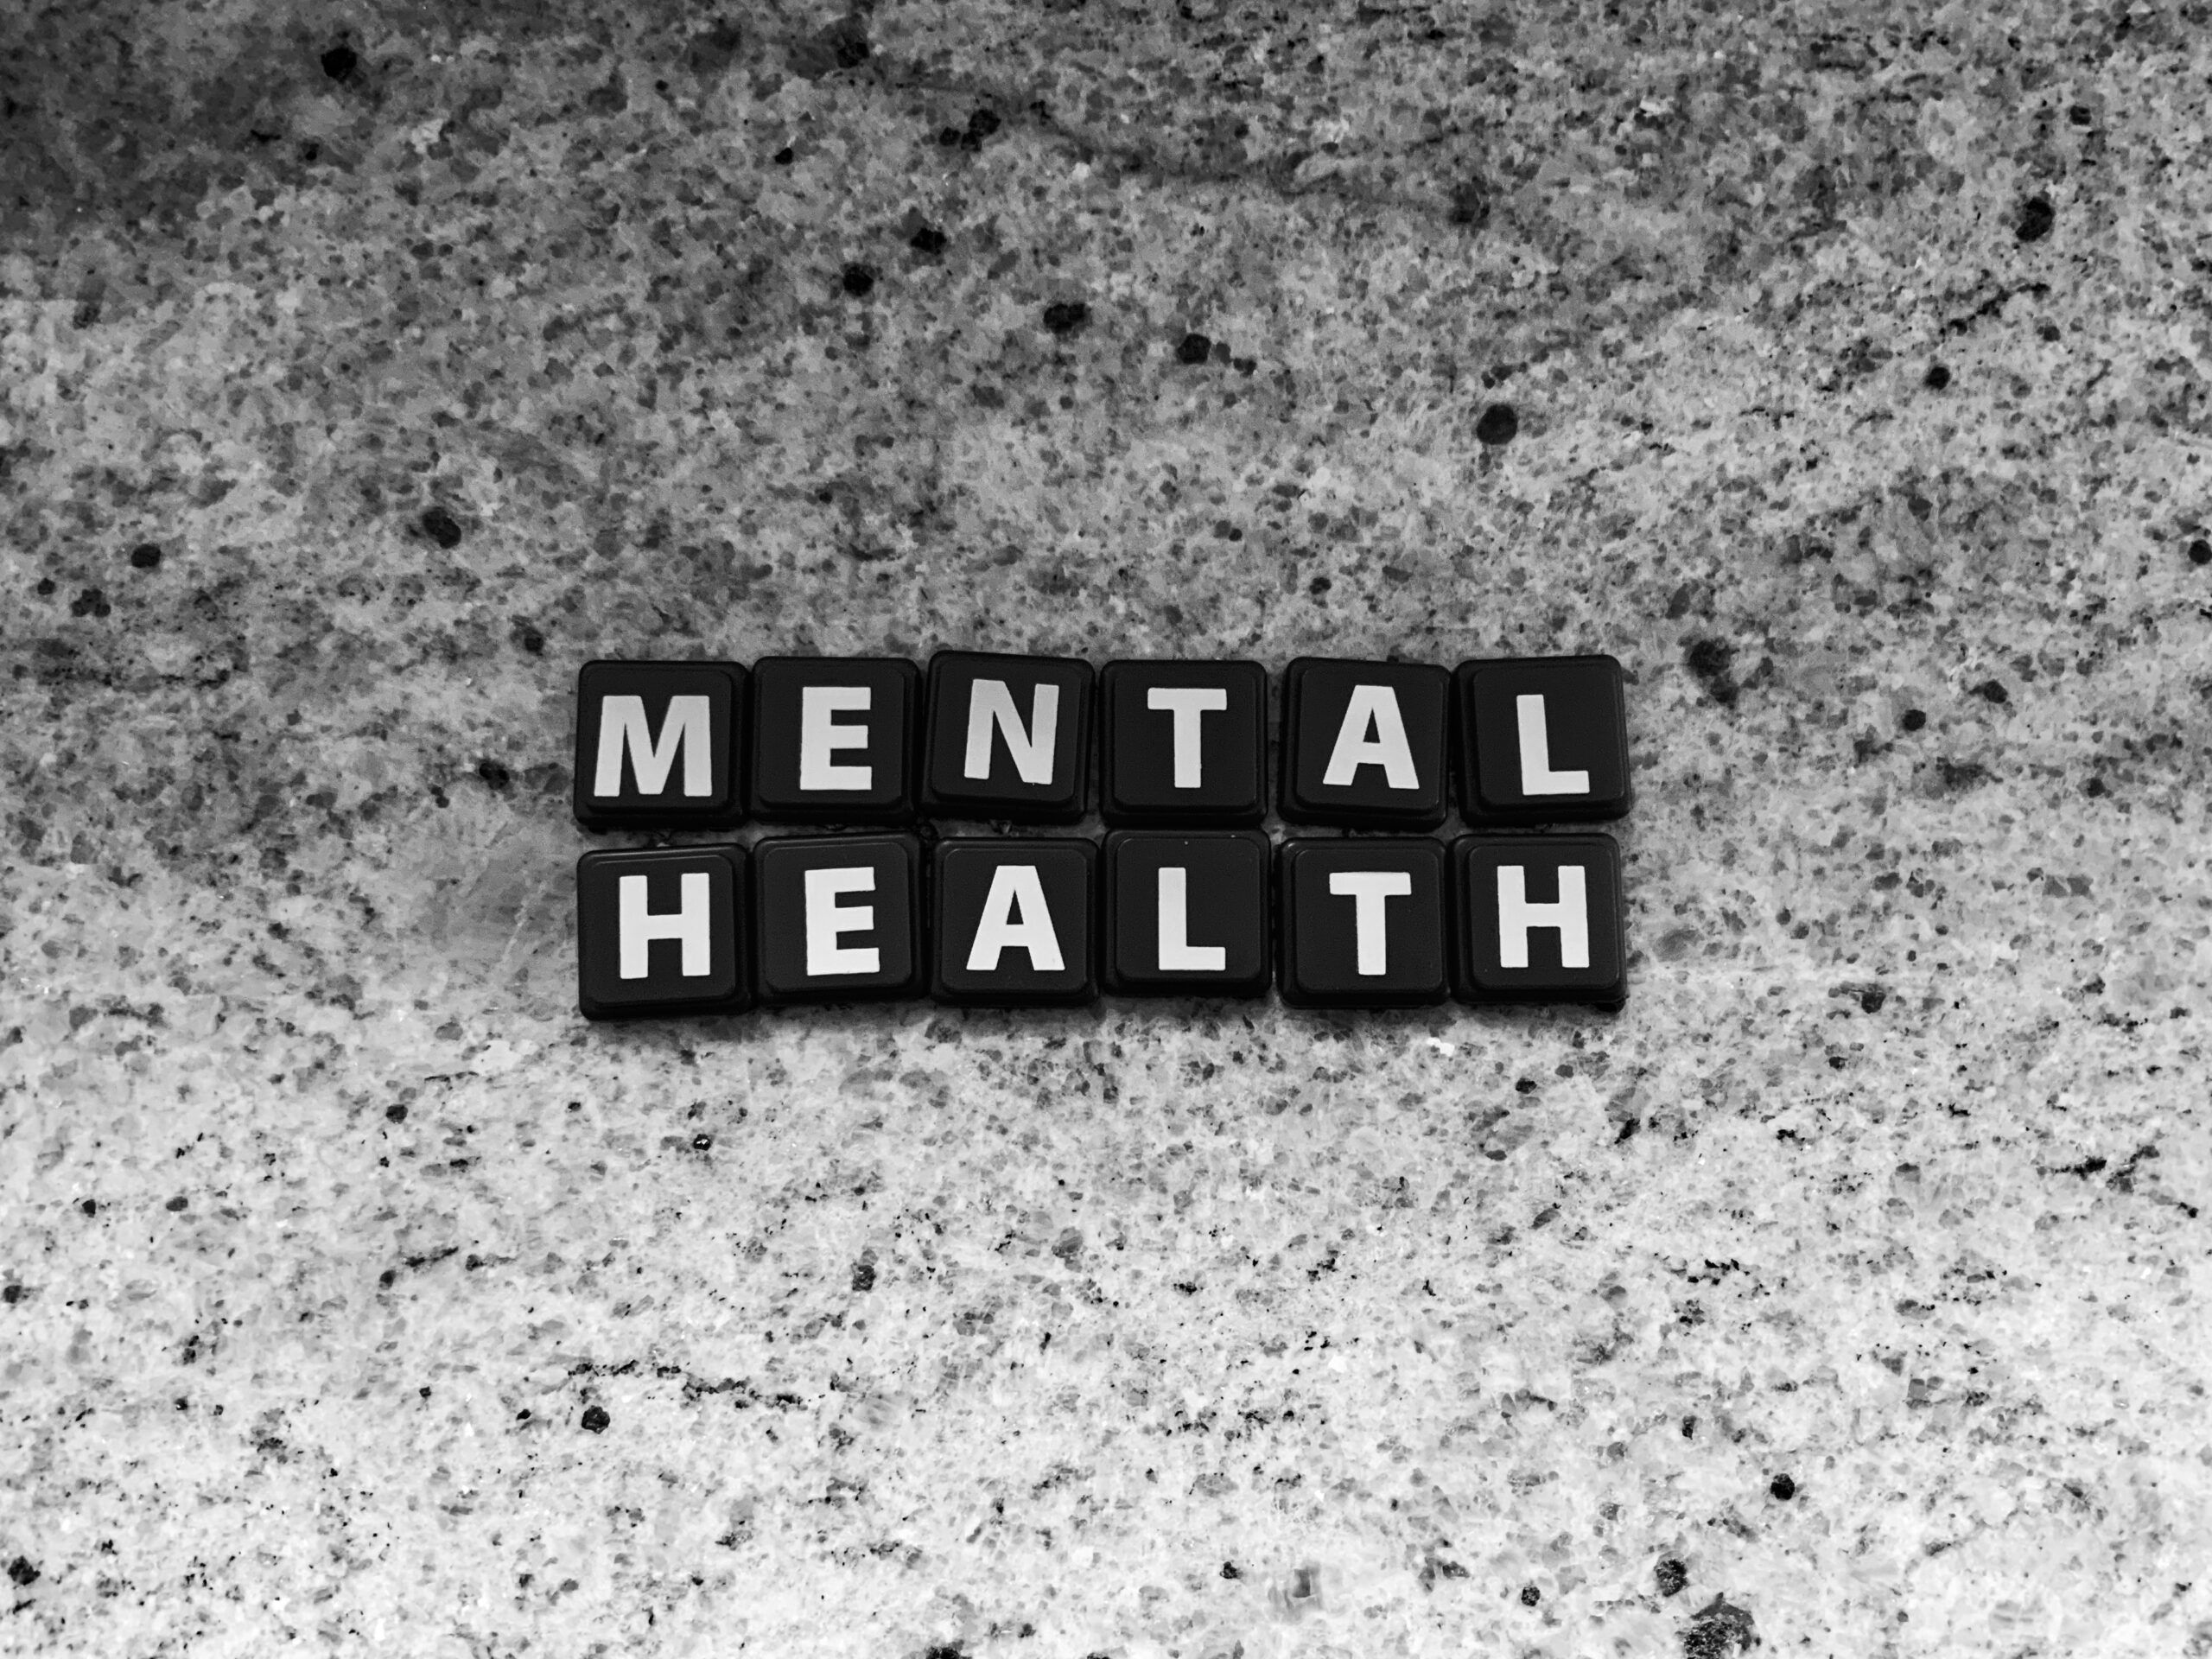 Defining Mental Health and Well-Being